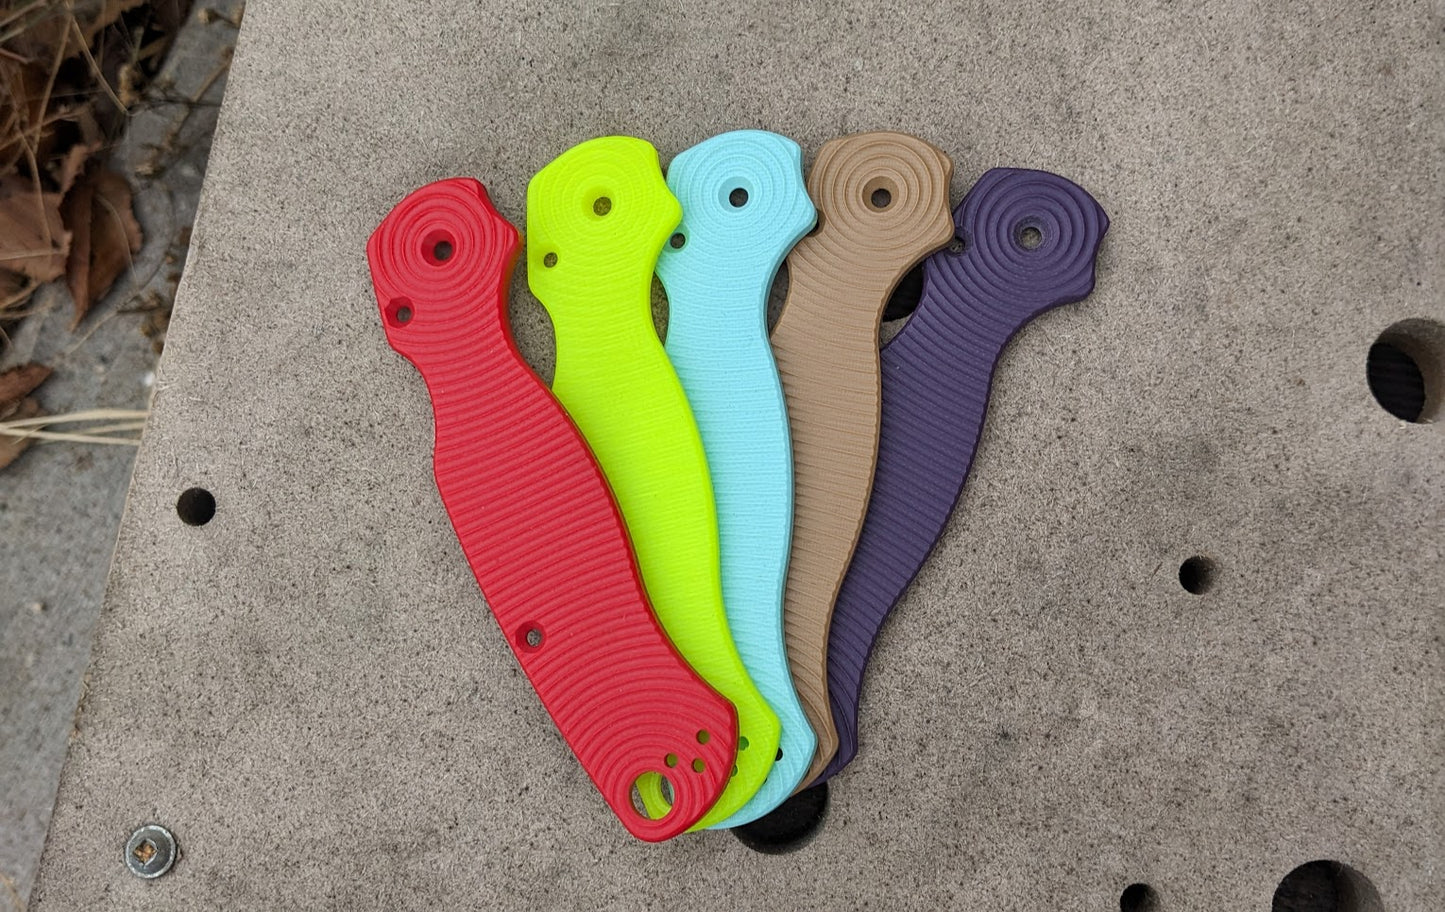 Spyderco Paramilitary 2 (PM2) G-10 Scale Sets